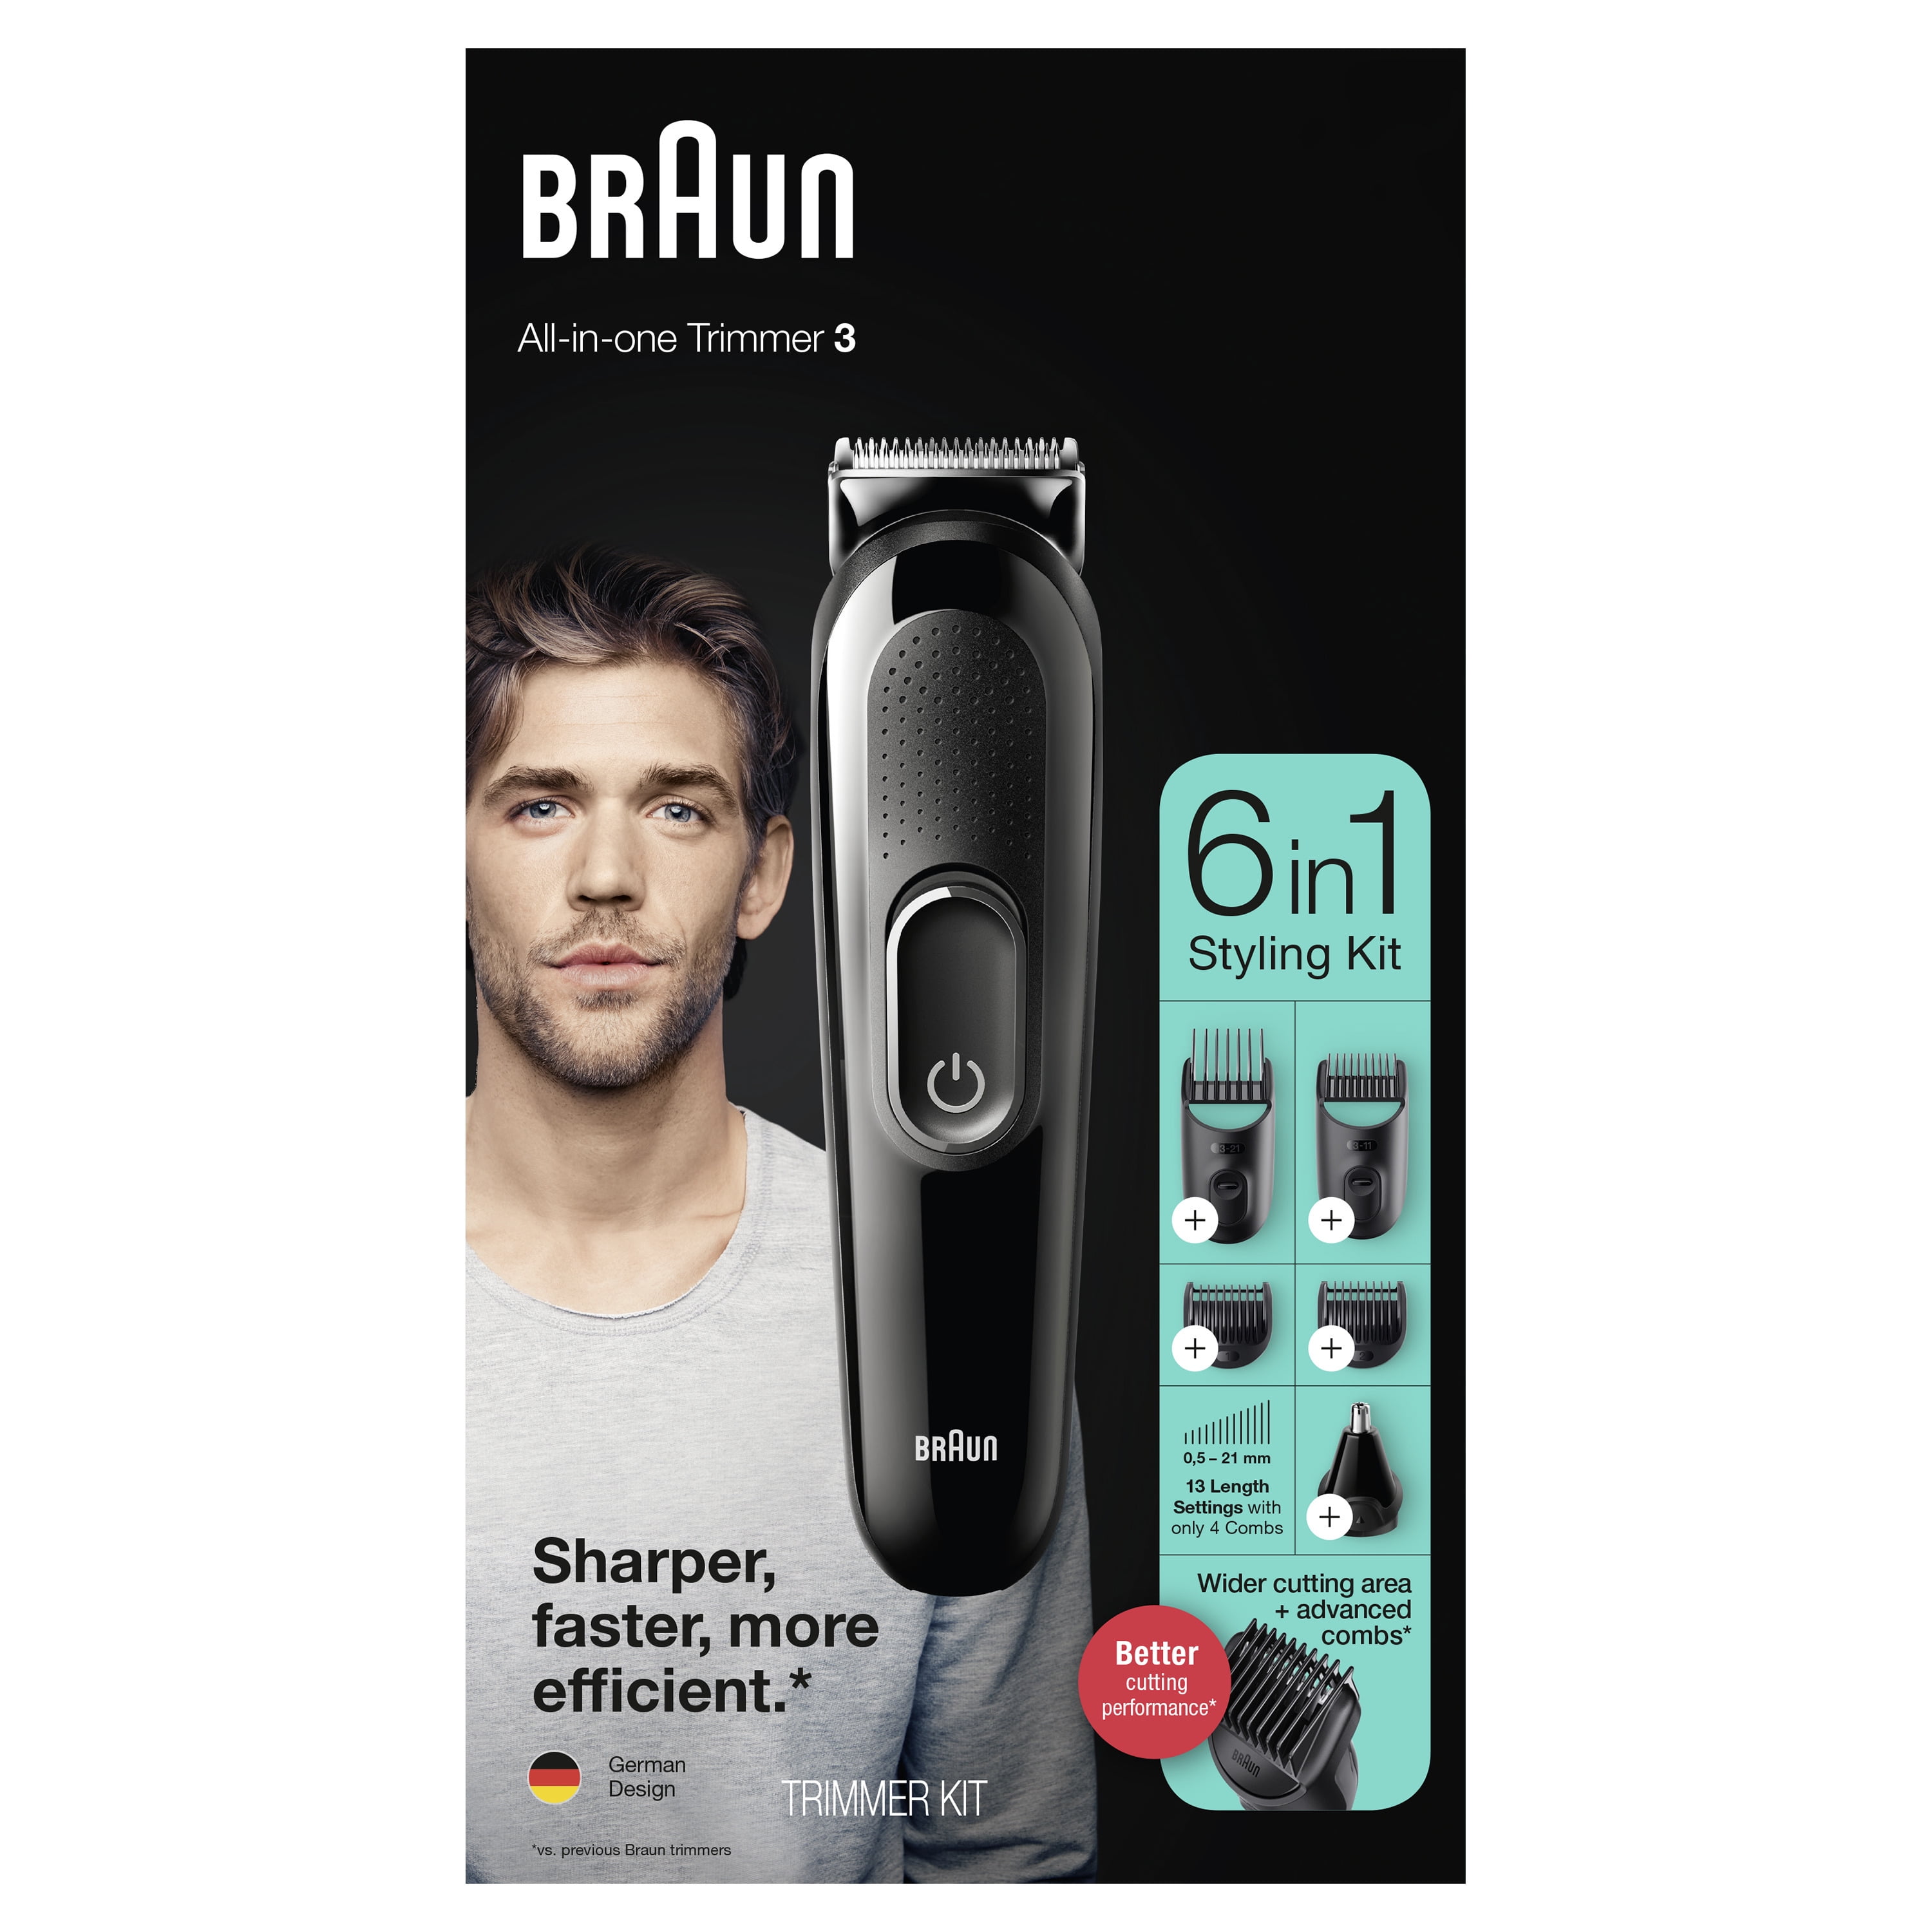 Braun MGK3220, 6-in-1 Beard Trimmer for Men, All-in-One Tool Grooming Kit, 5 Attachments, Black